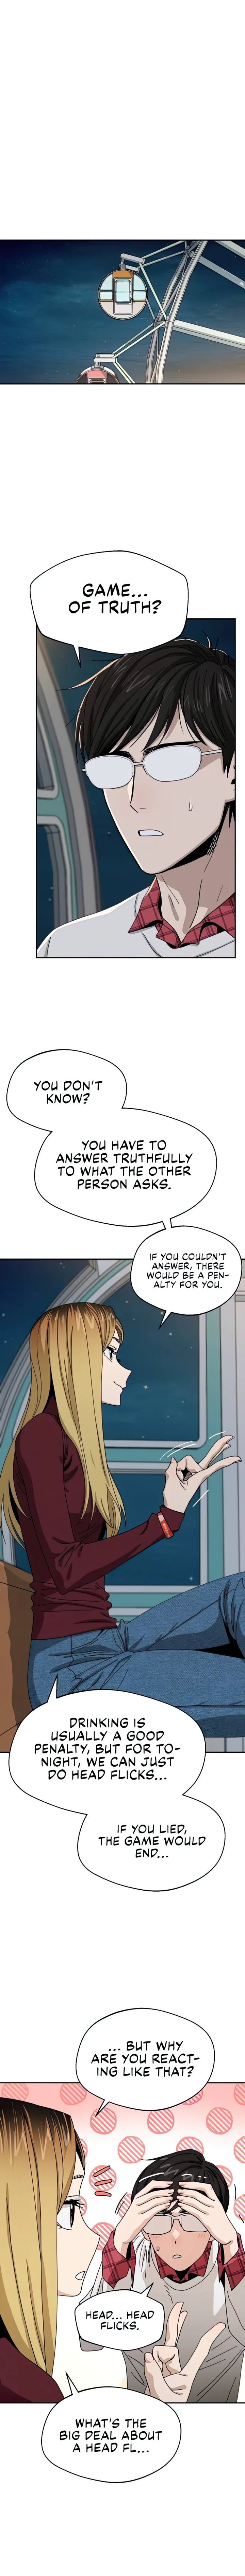 Match Made In Heaven By Chance Chapter 36 Page 2